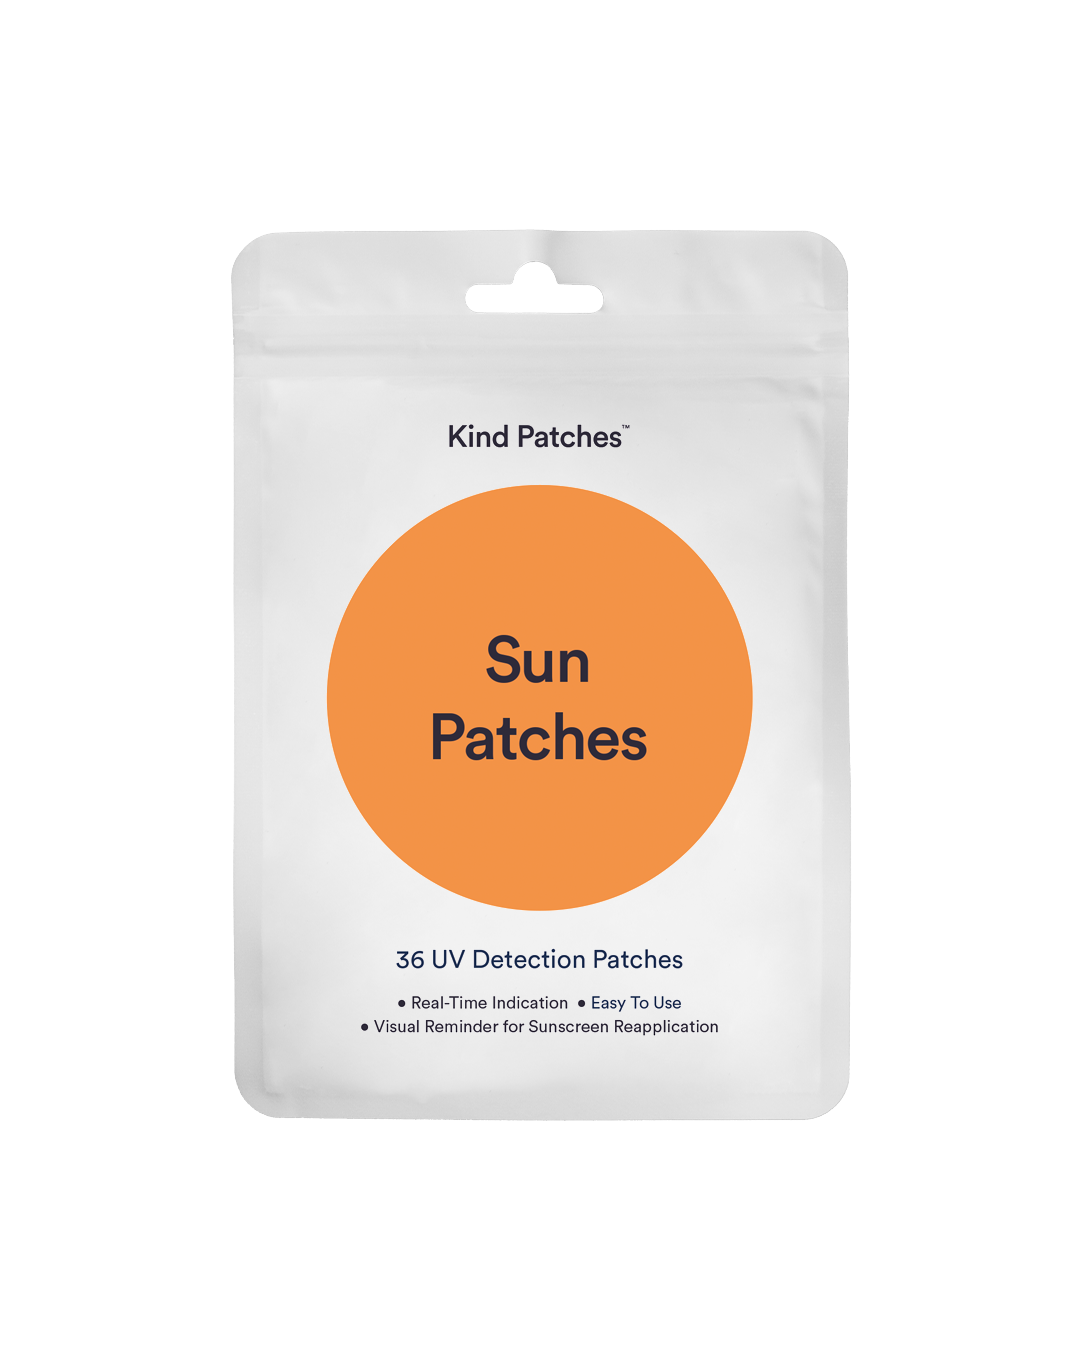 Sun Patches